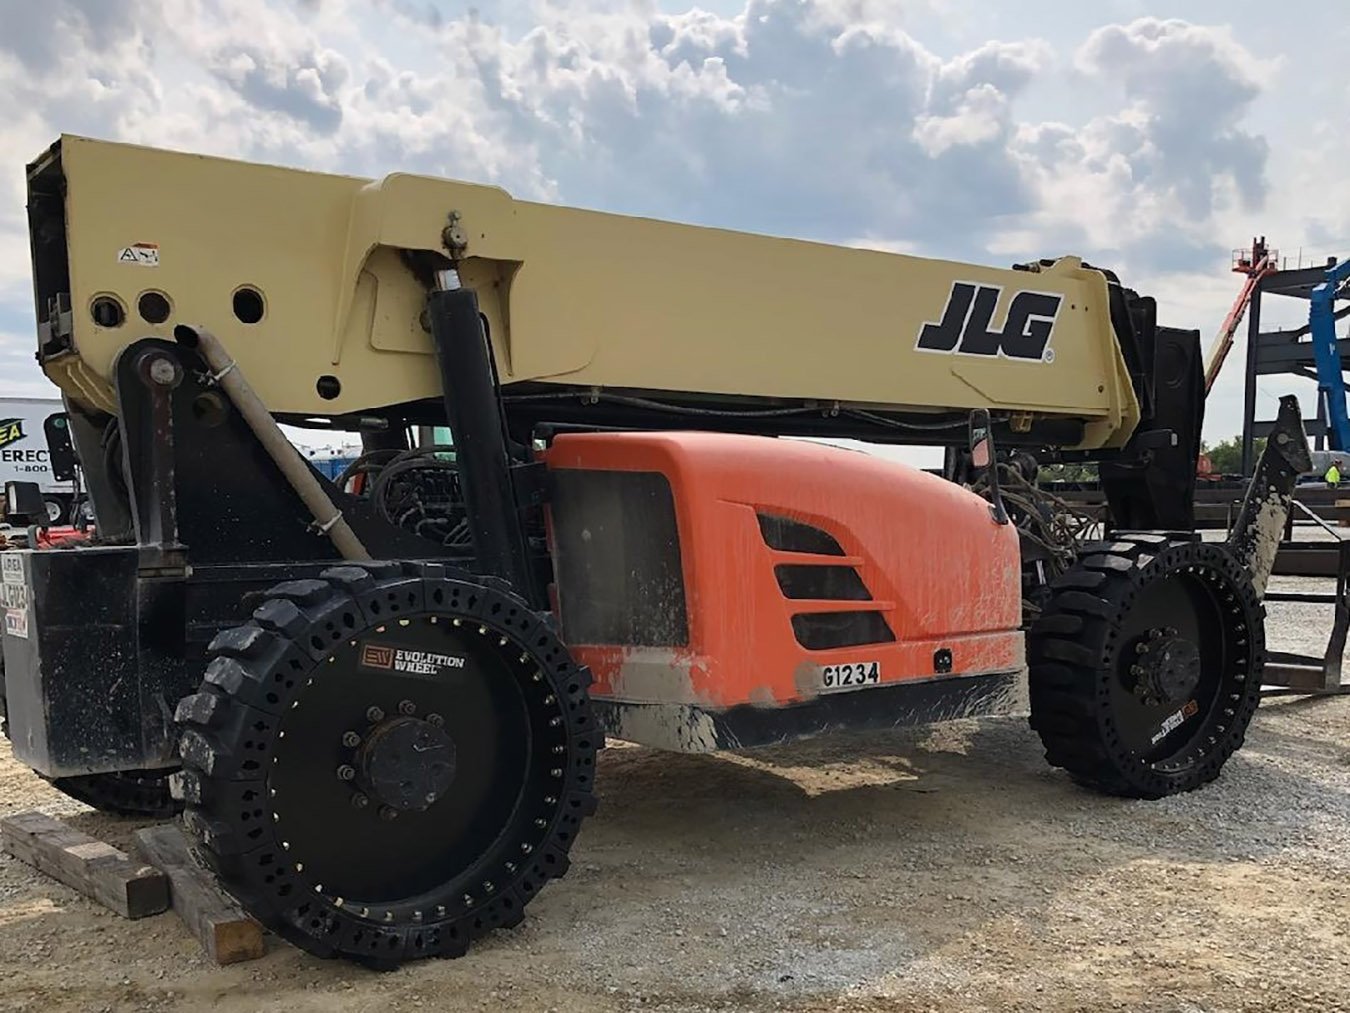 This image shows our CAT telehandler tires on a JLG telehandler